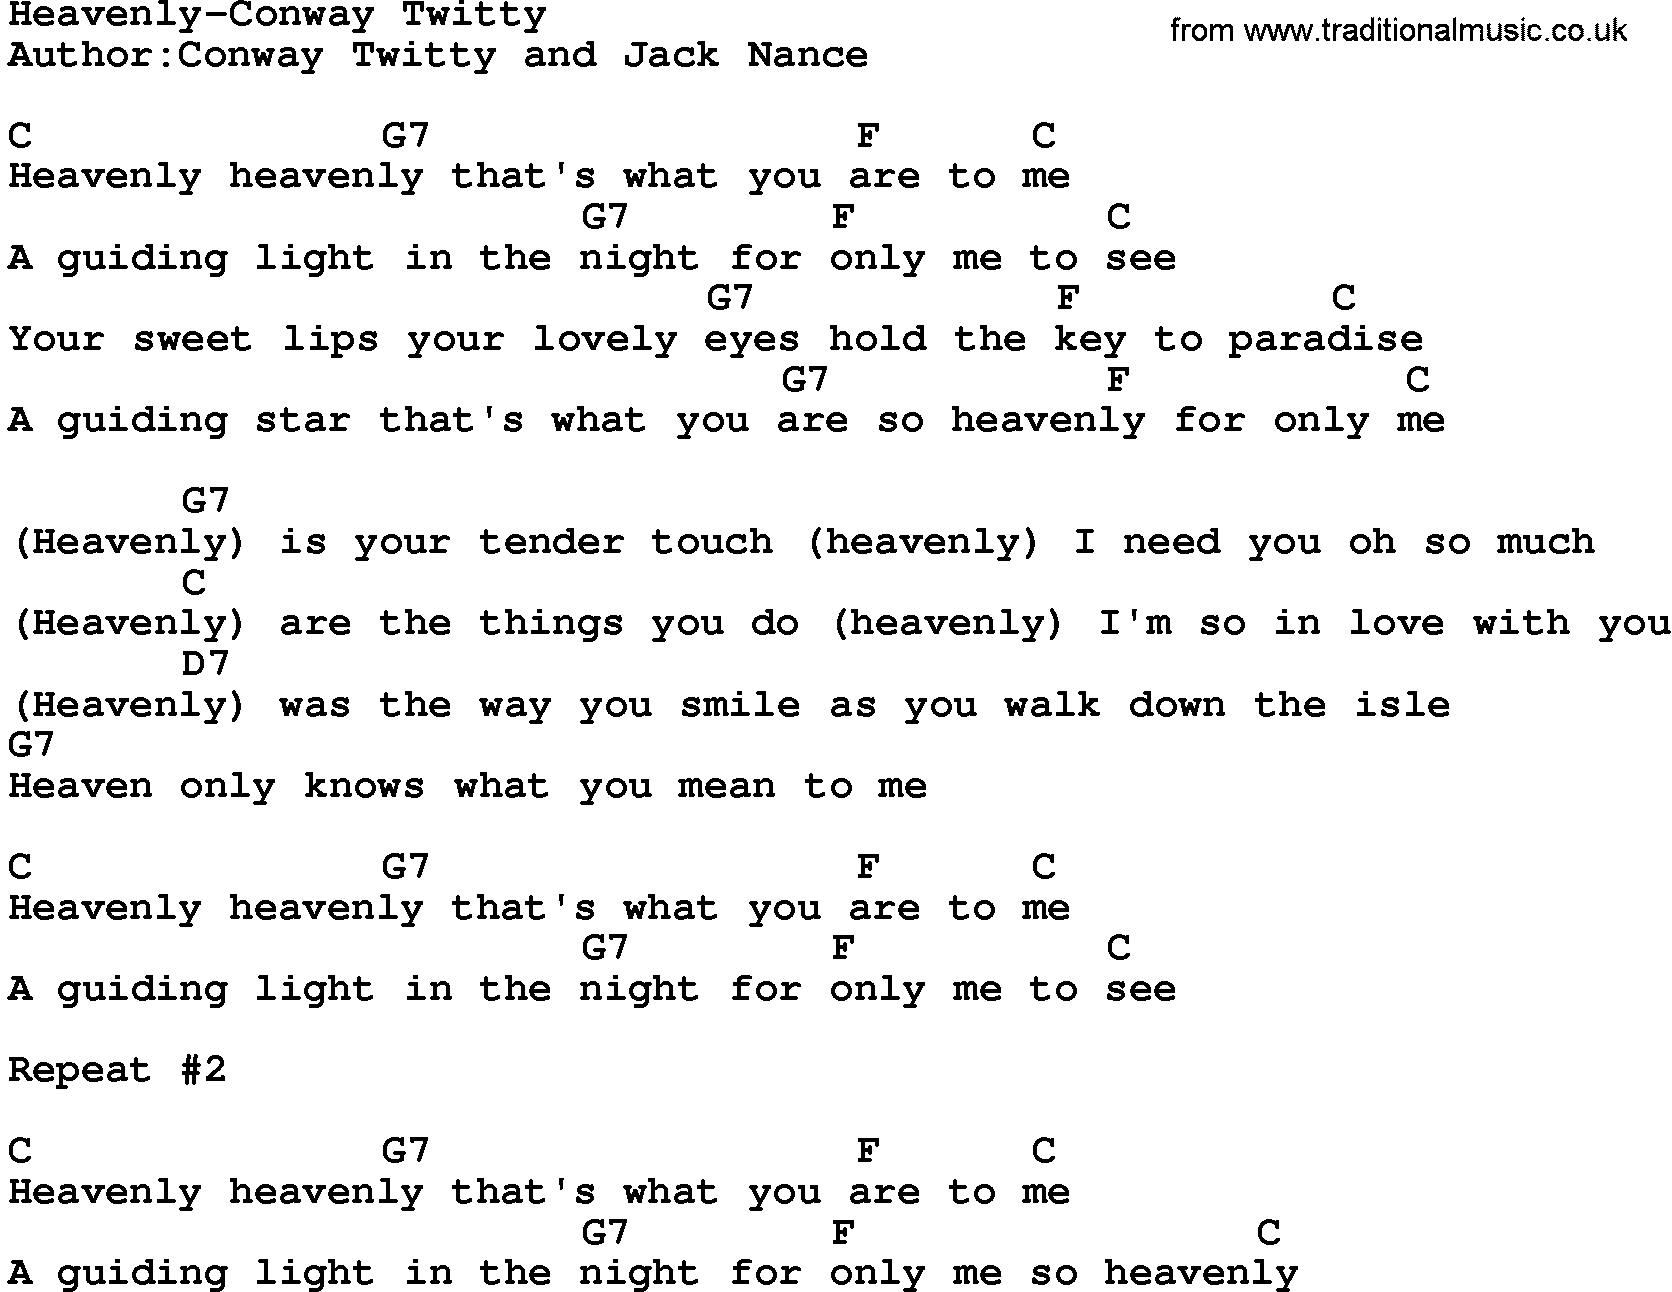 Country music song: Heavenly-Conway Twitty lyrics and chords